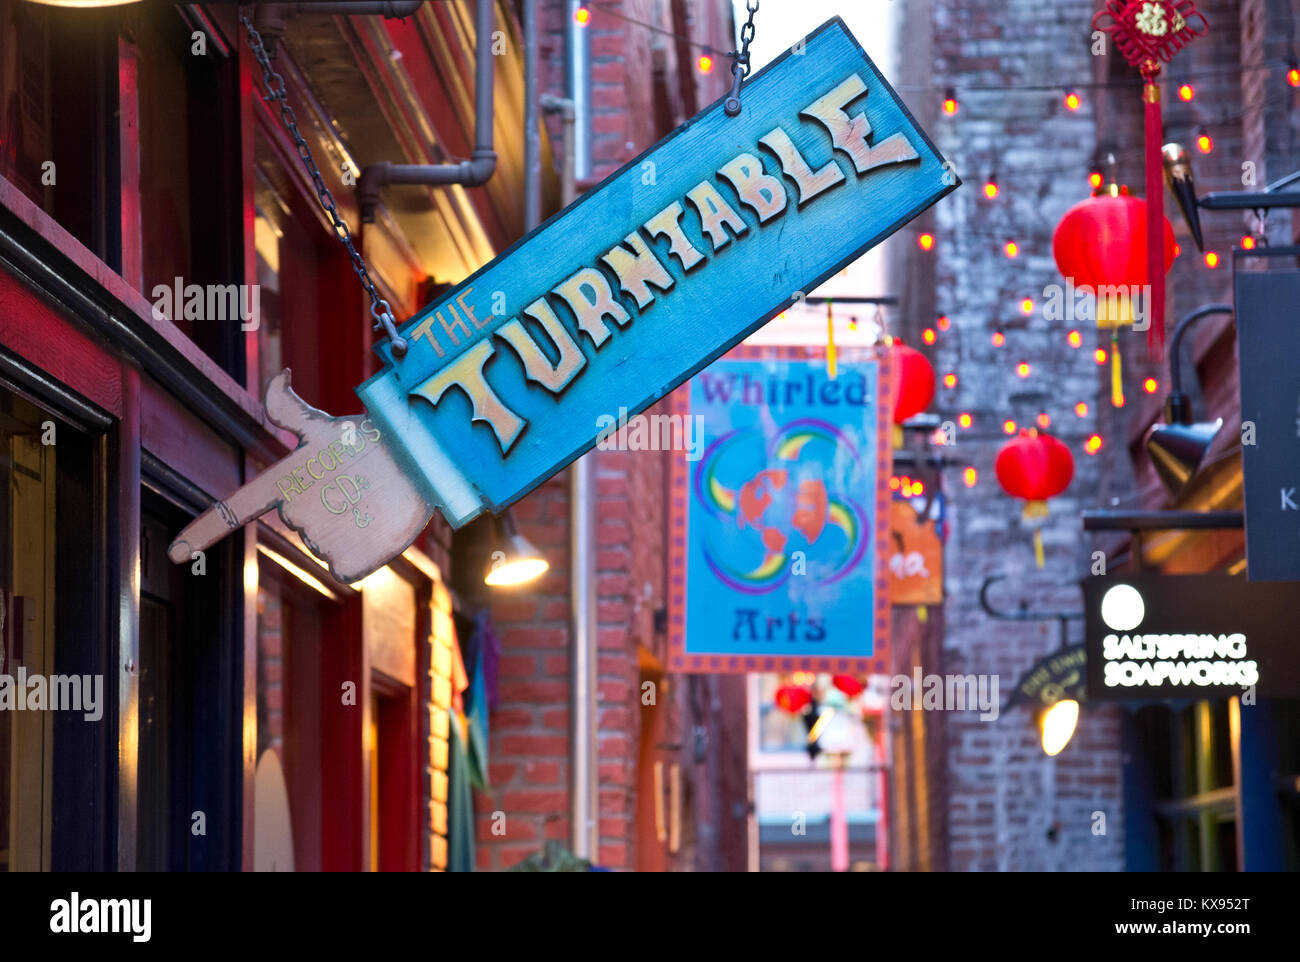 Hanging sign for Turtable Records store in Victoria, BC, Canada.  In Fan Tan Alley in Chinatown. Vinyl records shop in Victoria, British Columbia. Stock Photo